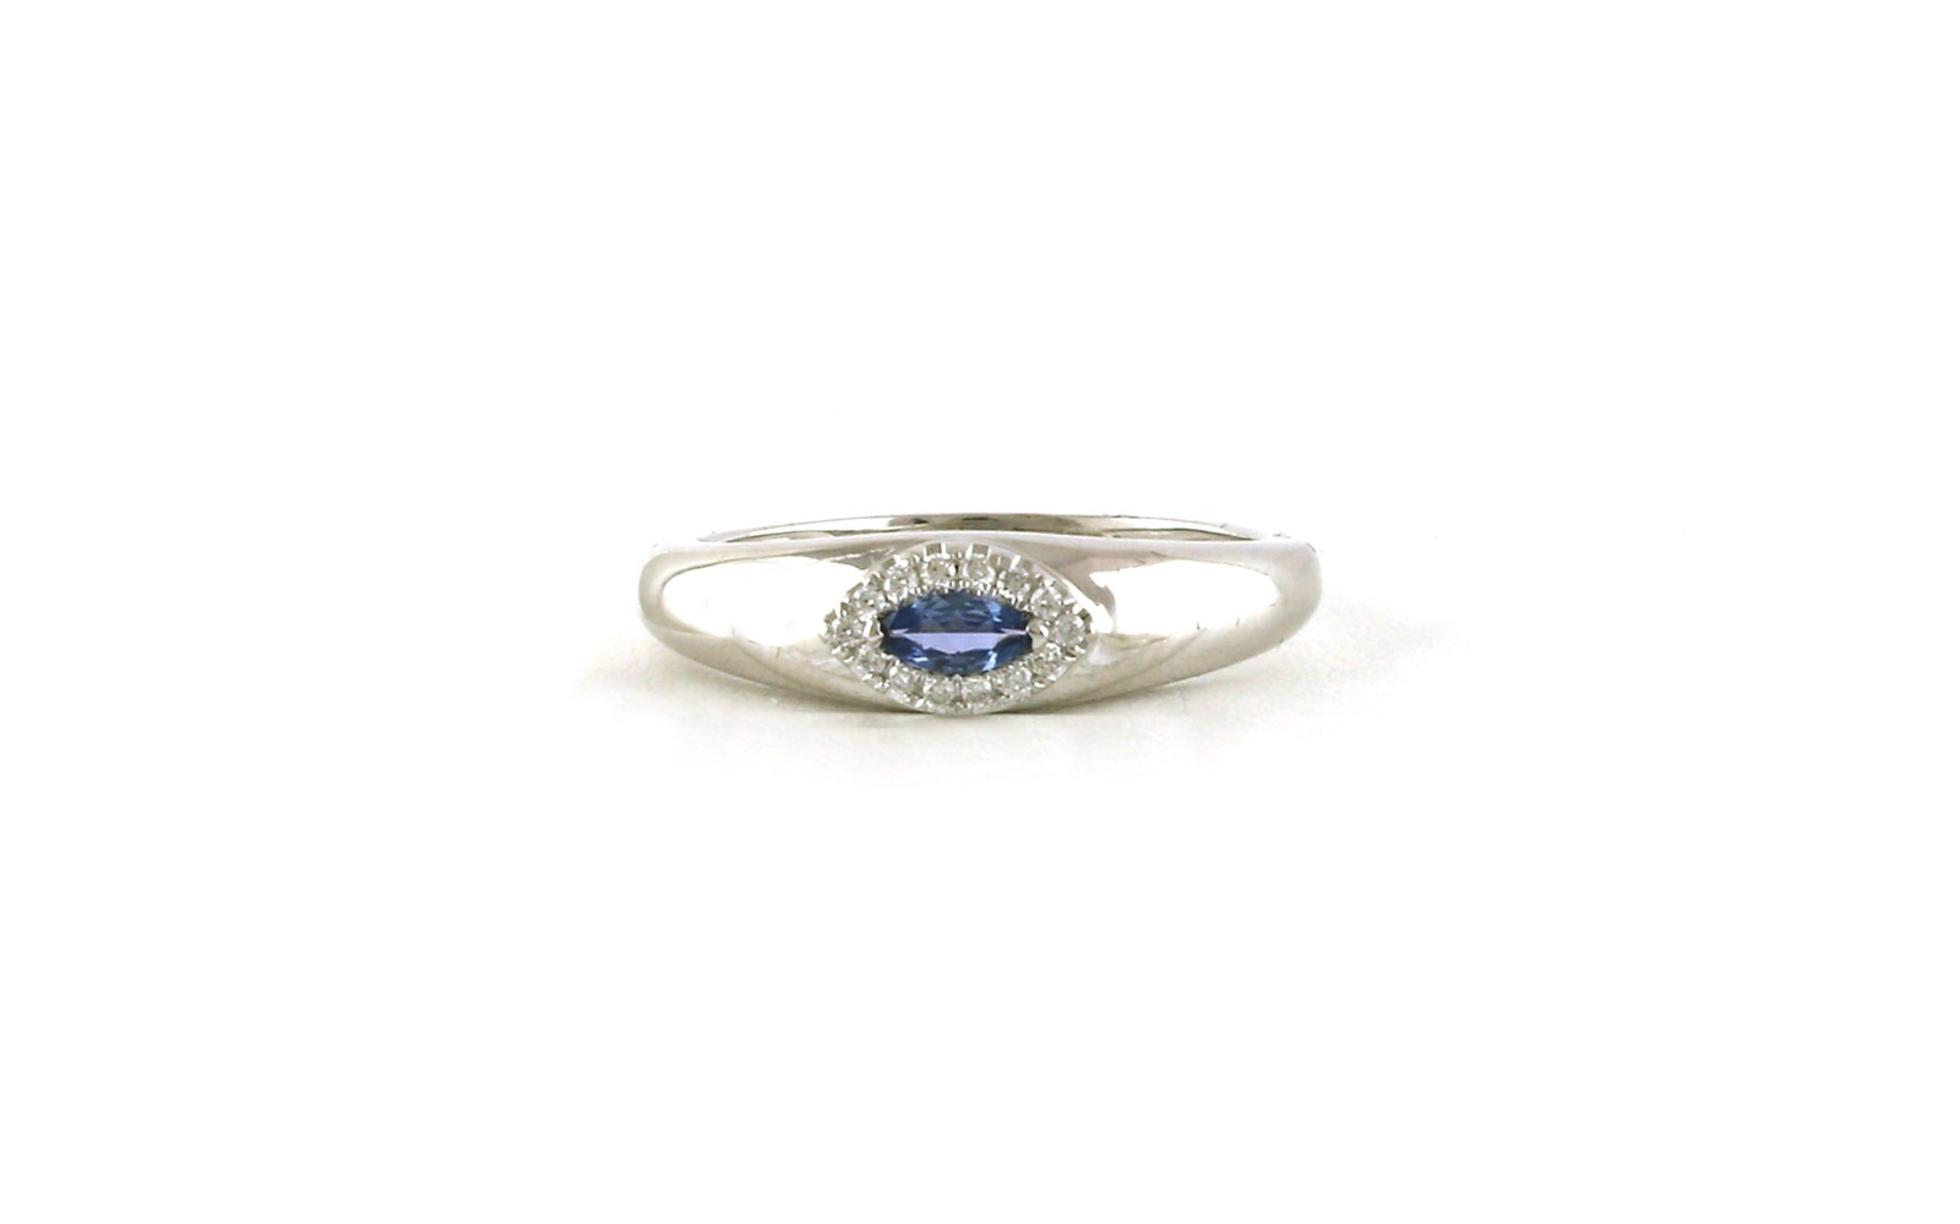 Halo-style Sideways Marquise-cut Montana Yogo Sapphire and Diamond Ring in White Gold (0.26cts TWT)